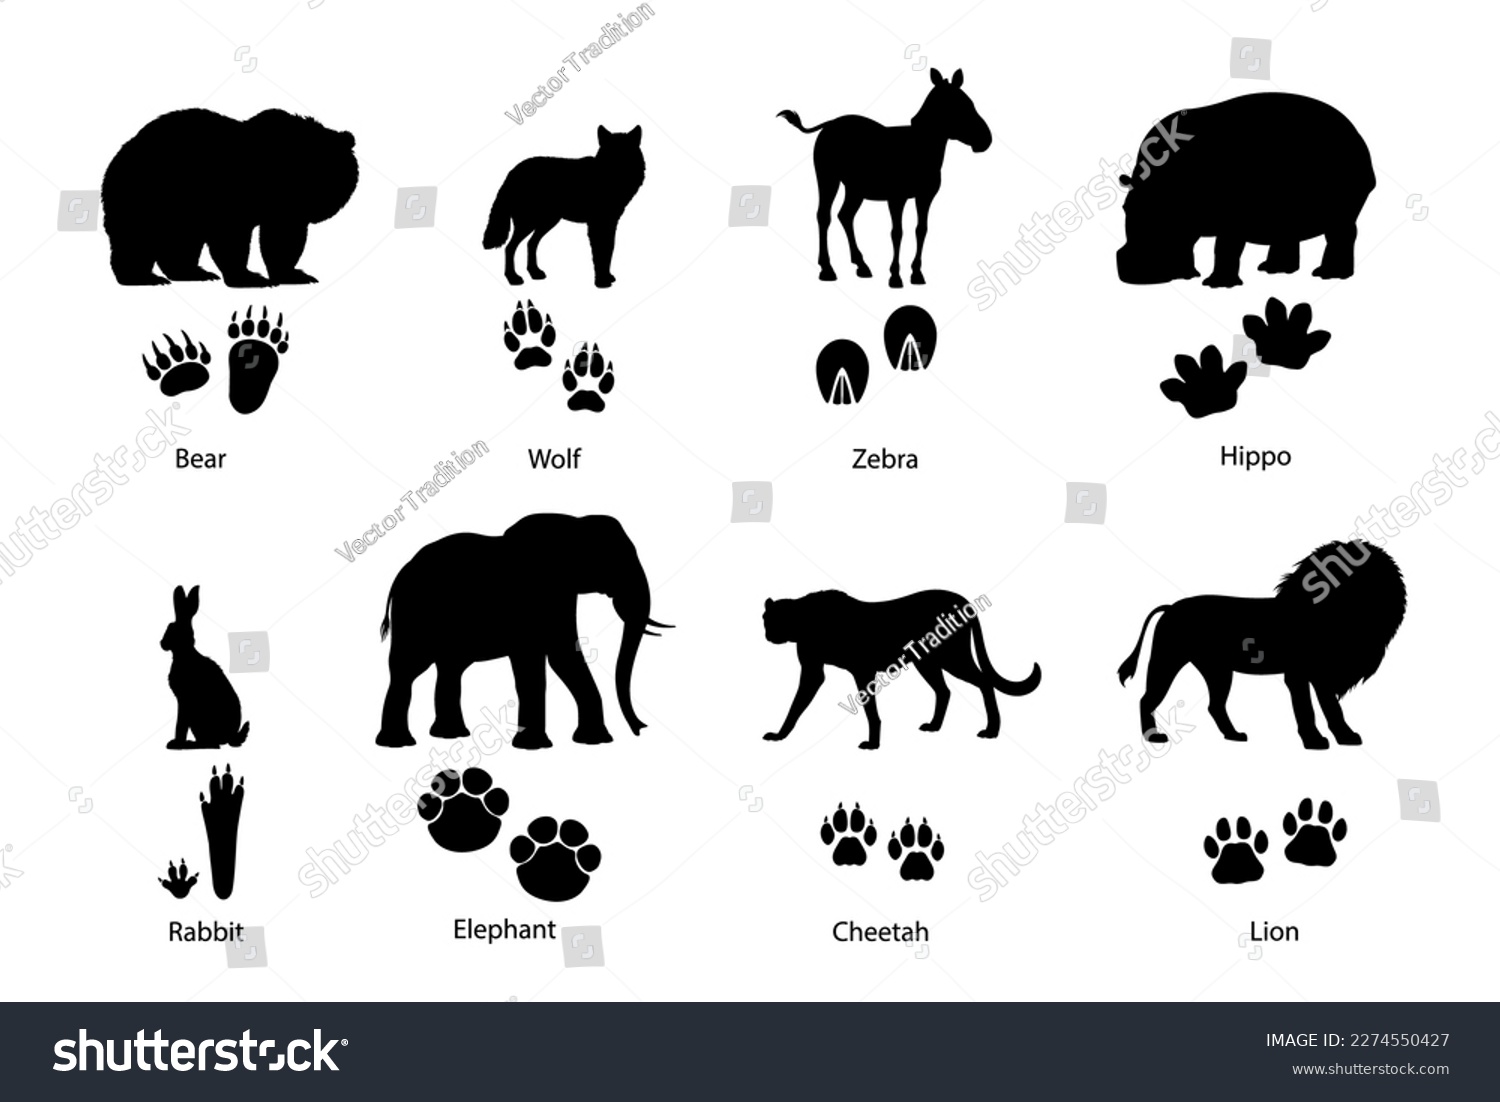 SVG of Animal footprints and silhouettes. Grizzly bear, wolf, zebra and hippopotamus, rabbit or hare, african elephant, cheetah savannah and lion wild cats silhouettes and animals paws vector footprints svg